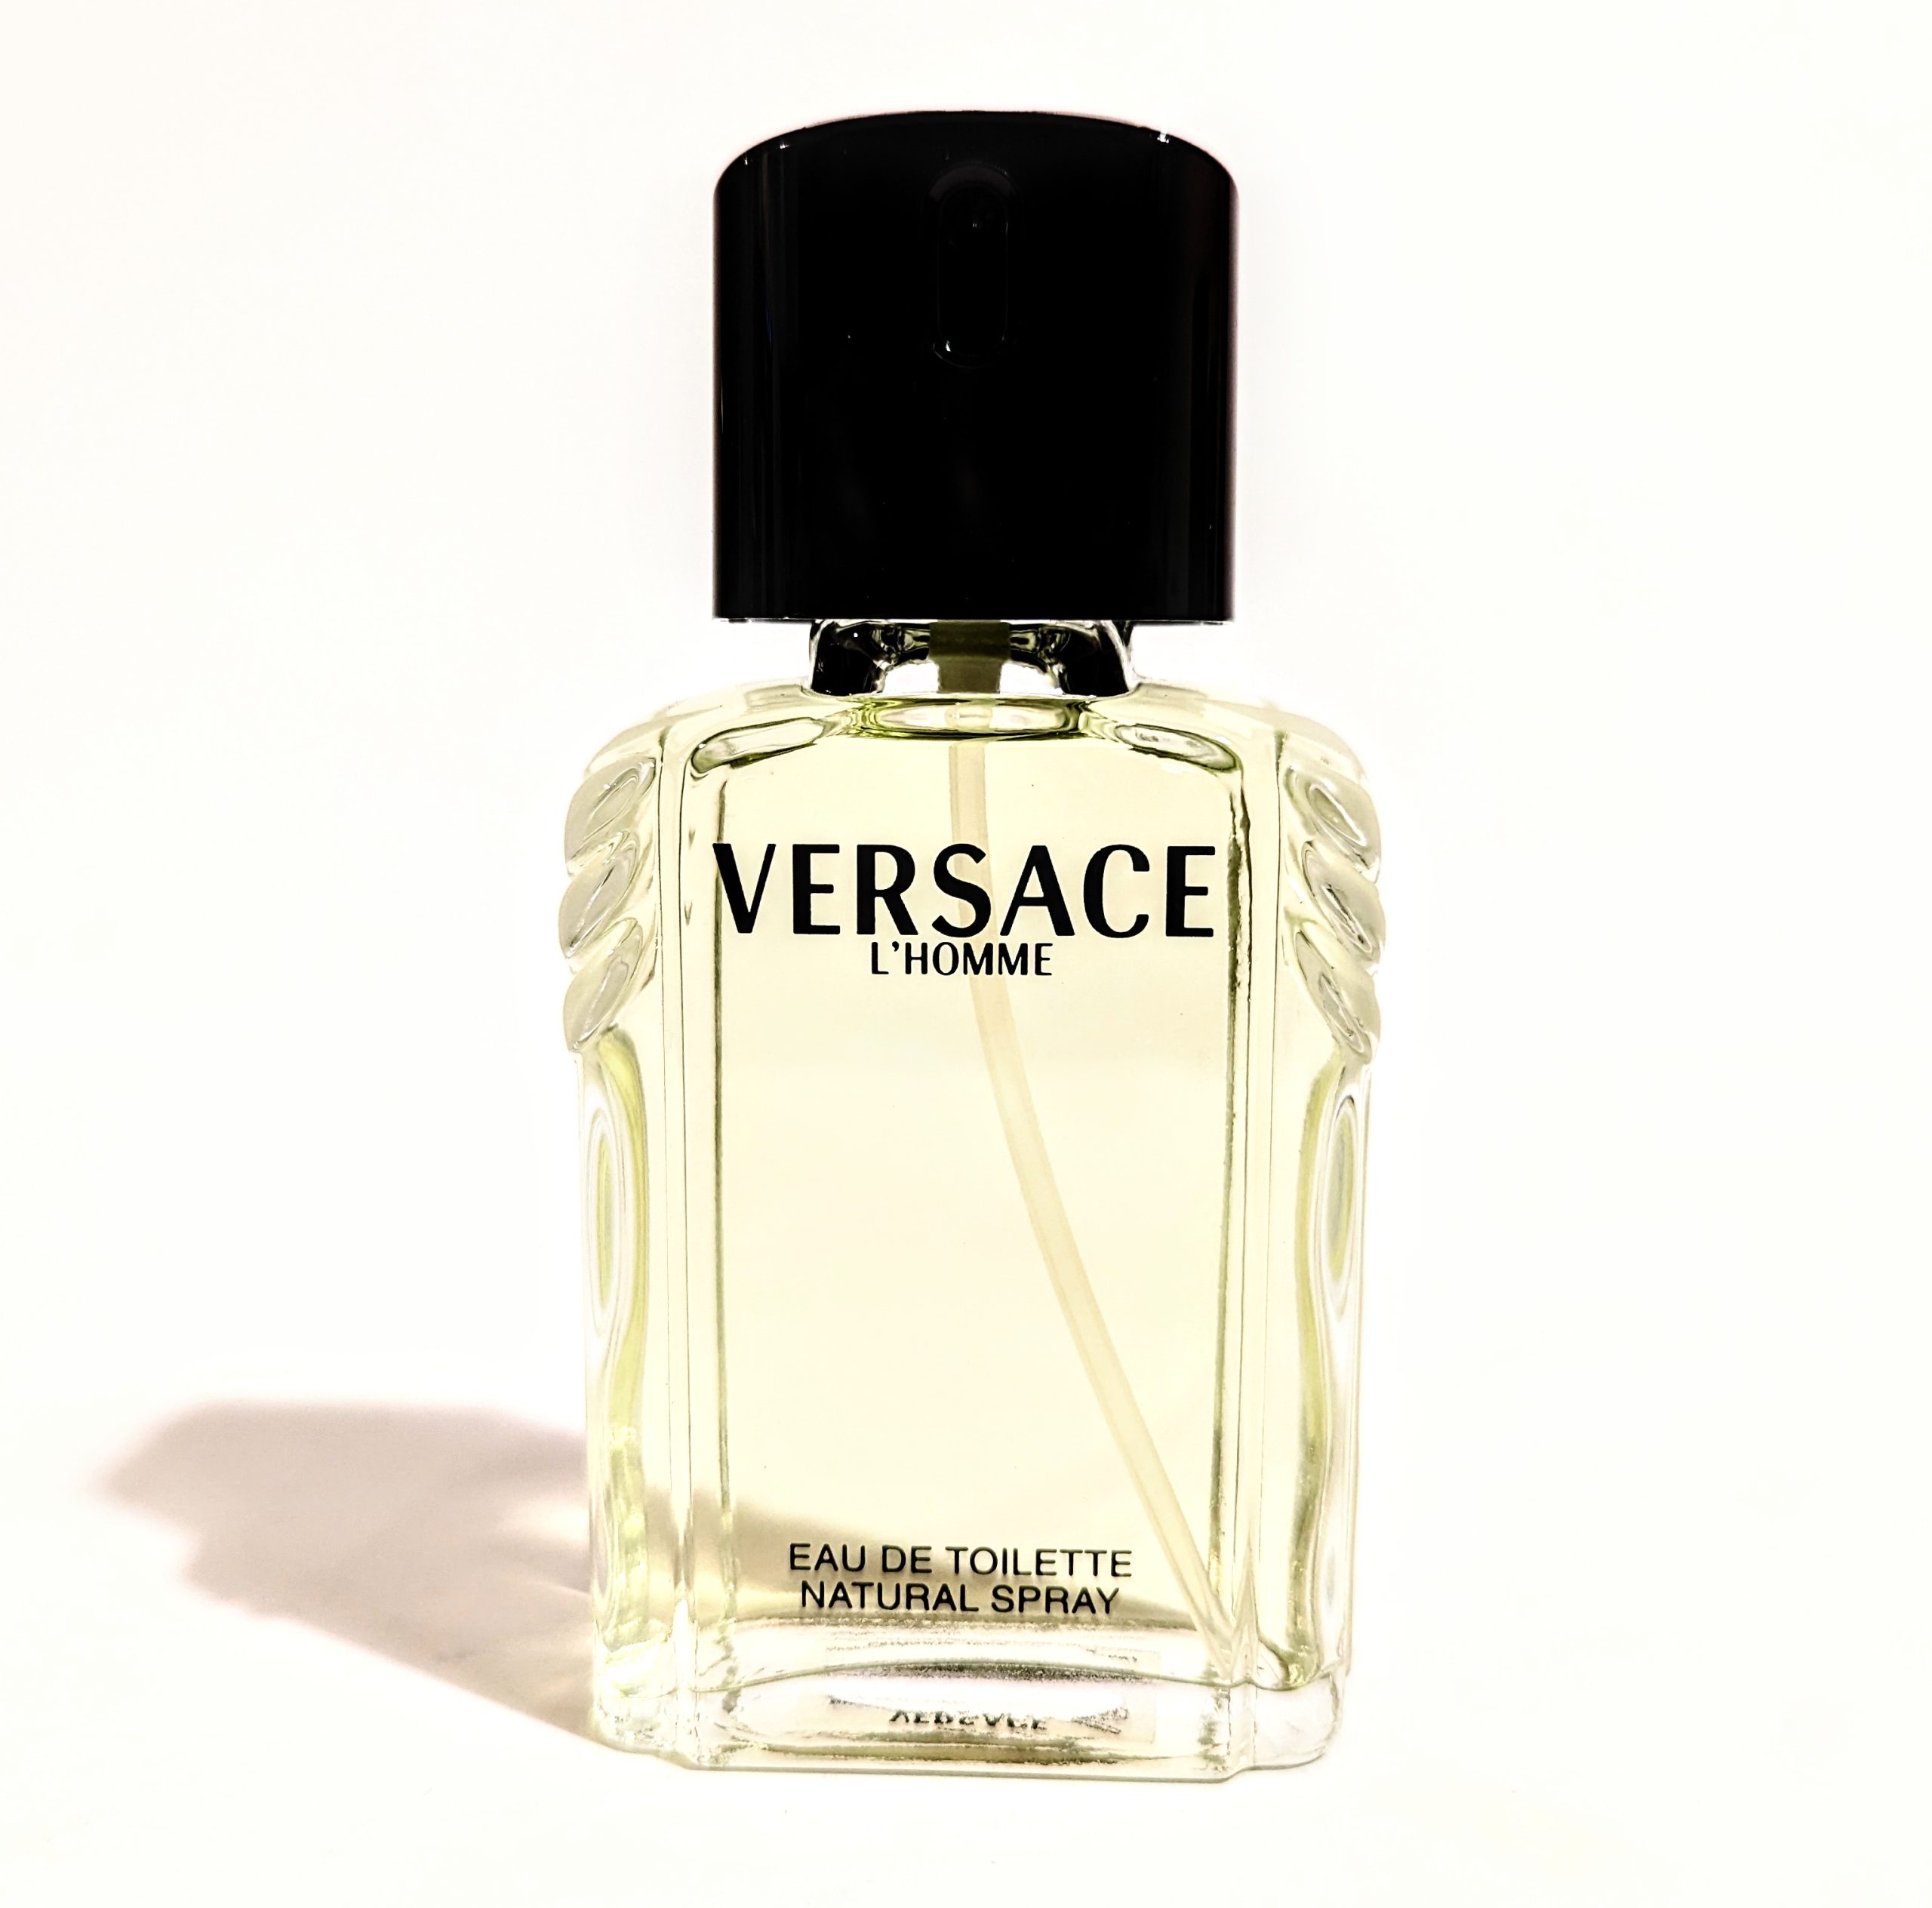 A bottle of versace cologne on a white background.